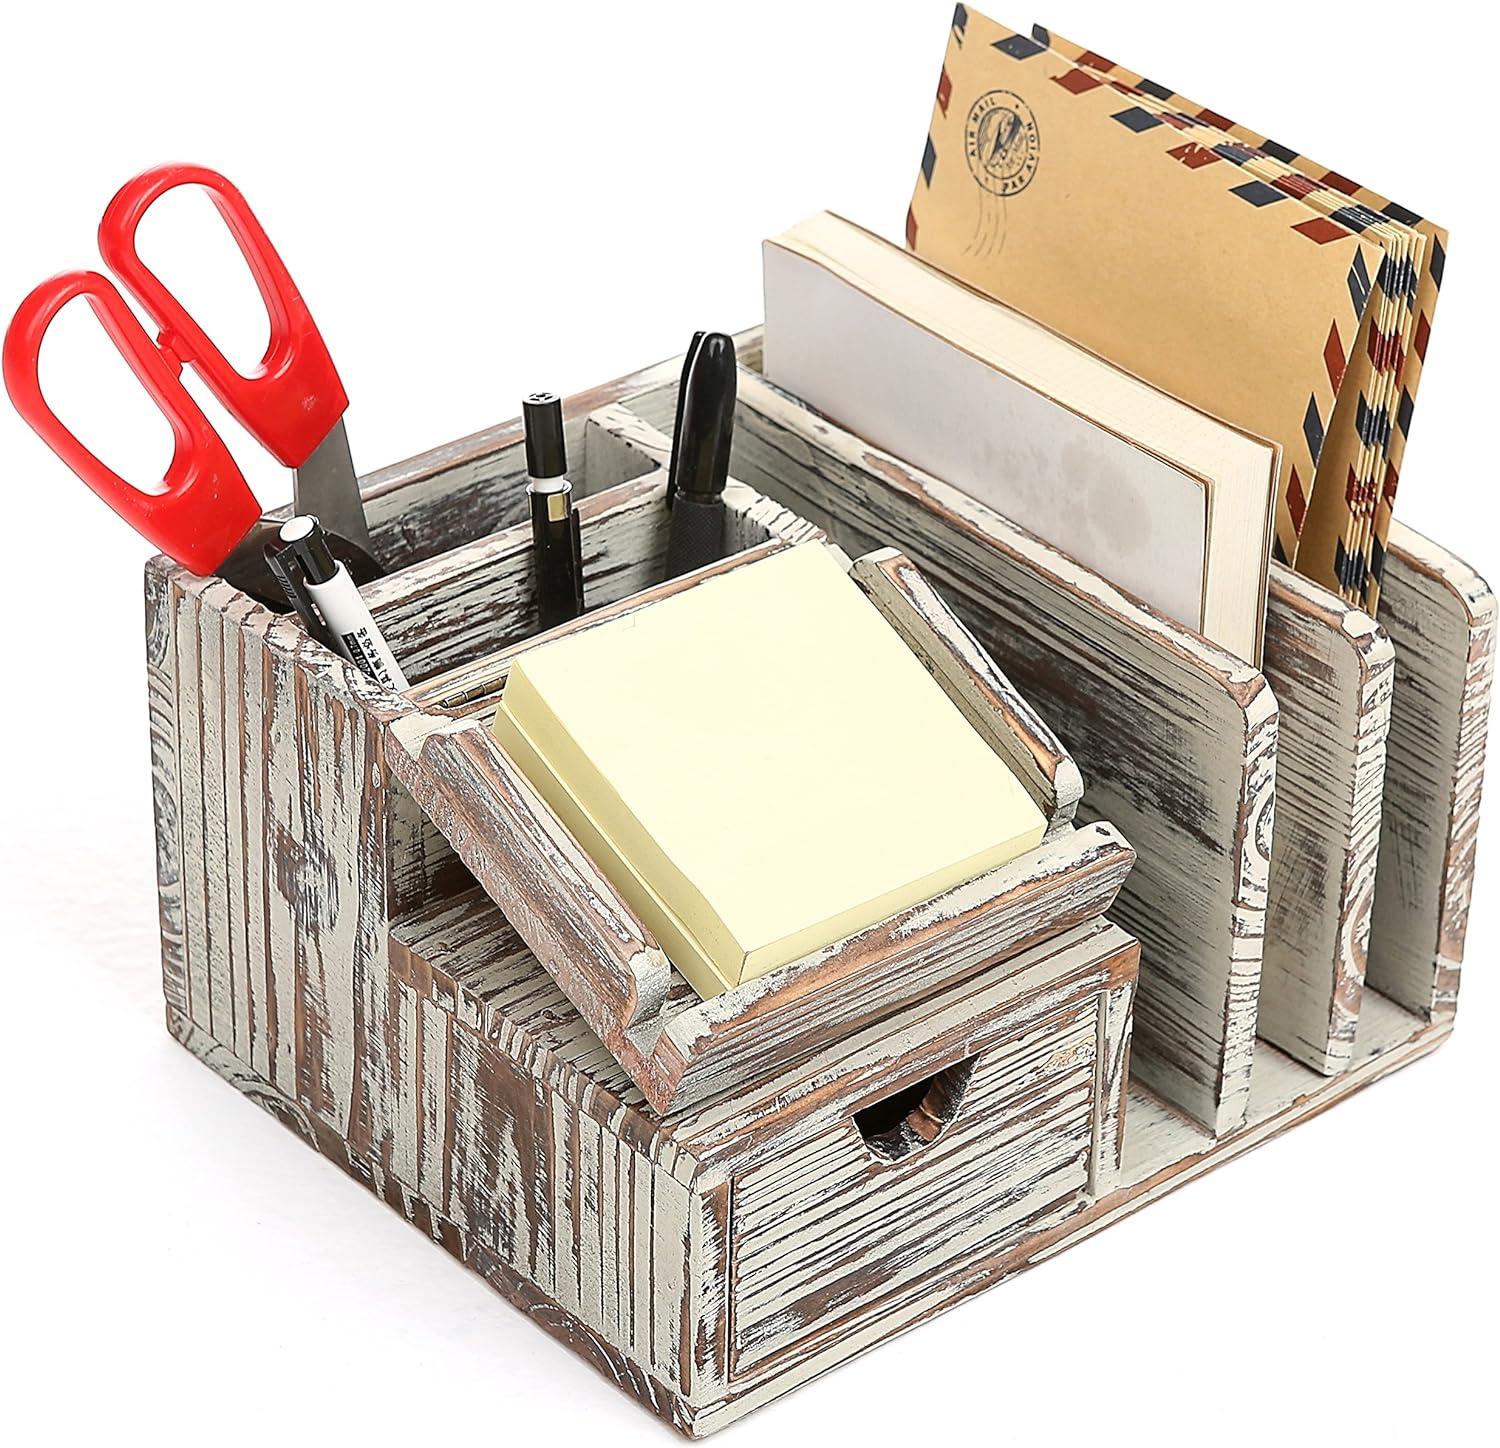 mygift torched wood desktop office organizer w/sticky note pad holder mail sorter and pullout drawer  mygift